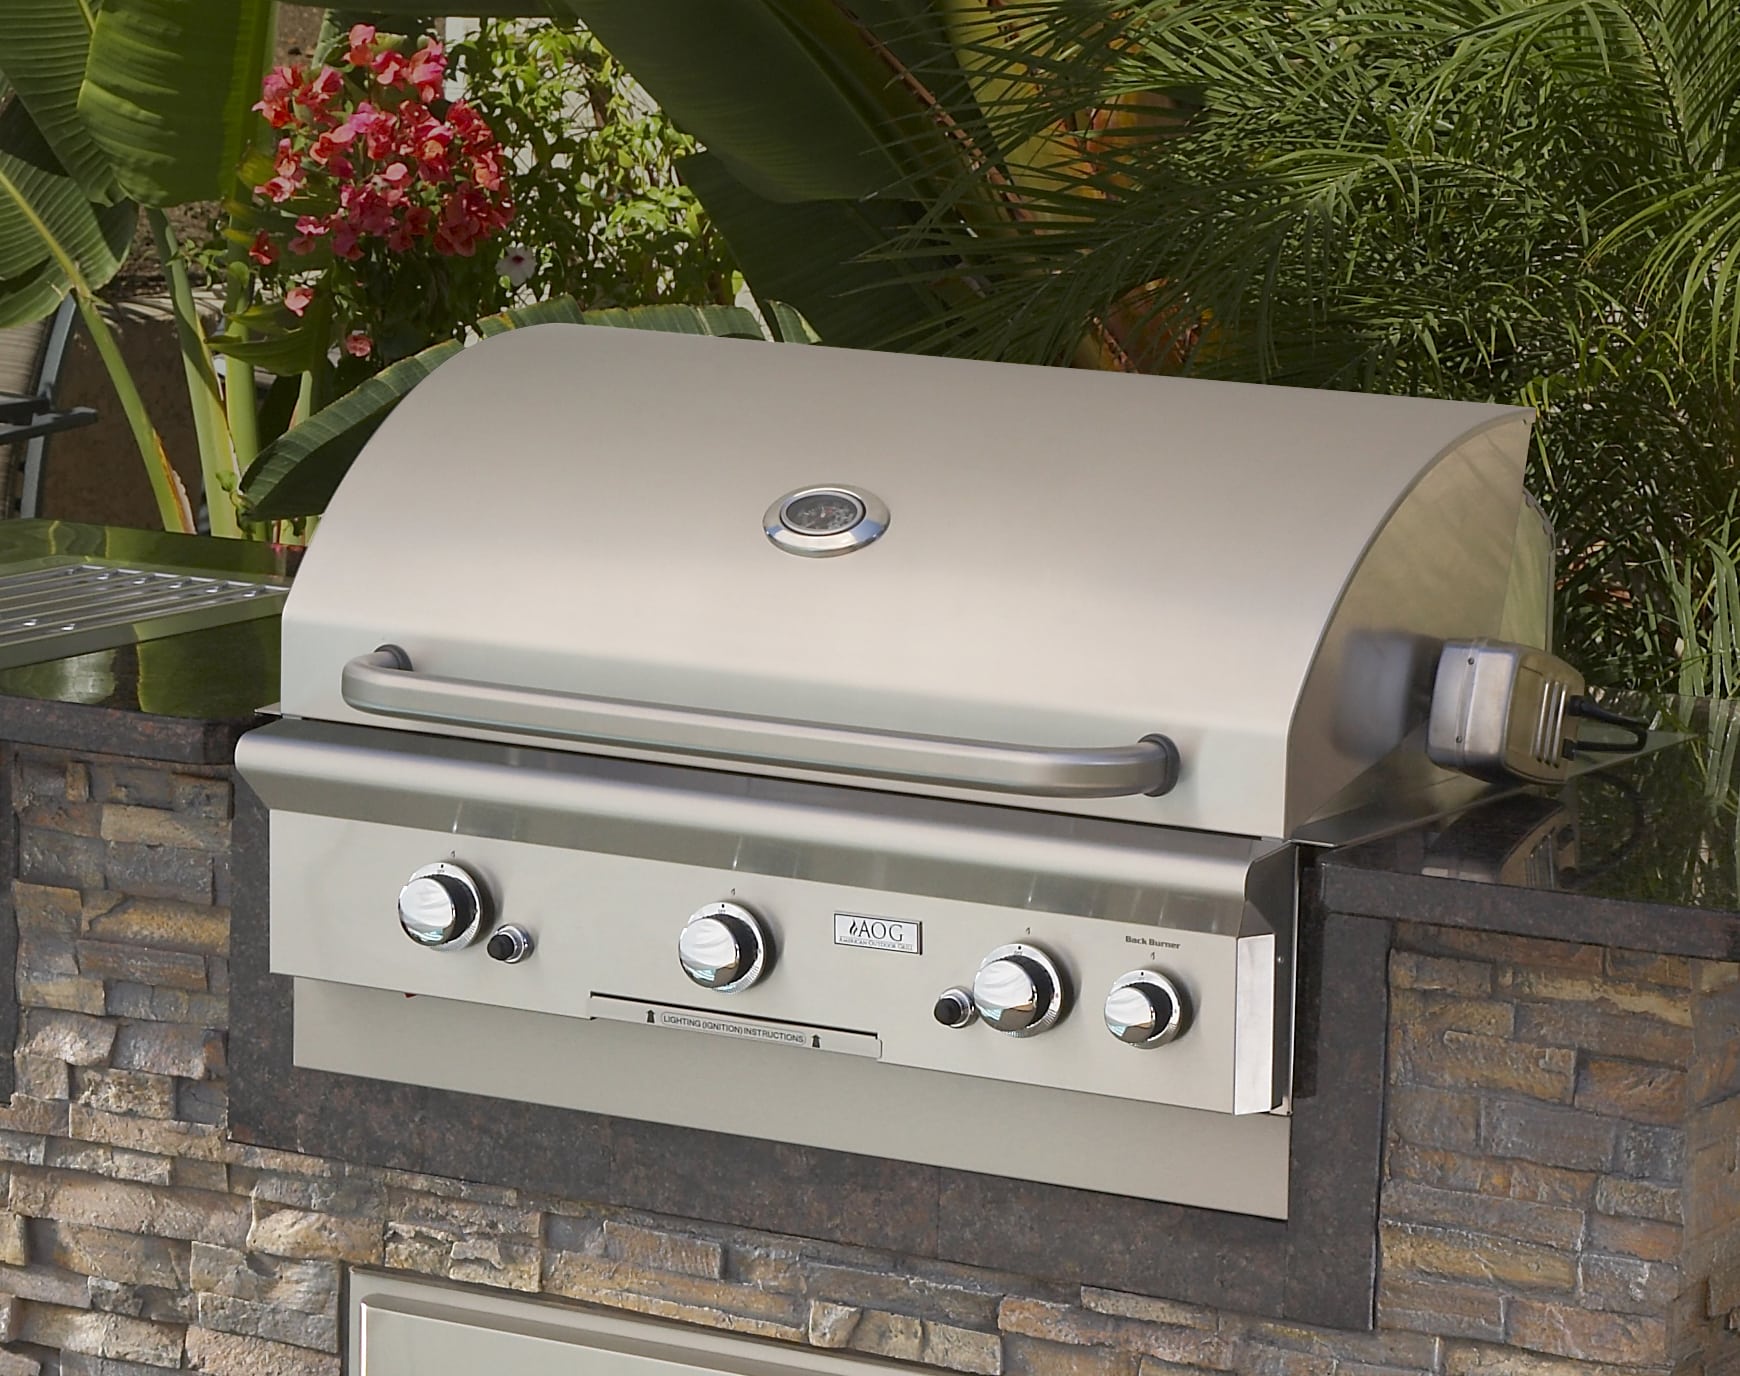 aog outdoor kitchen grill jacksonville